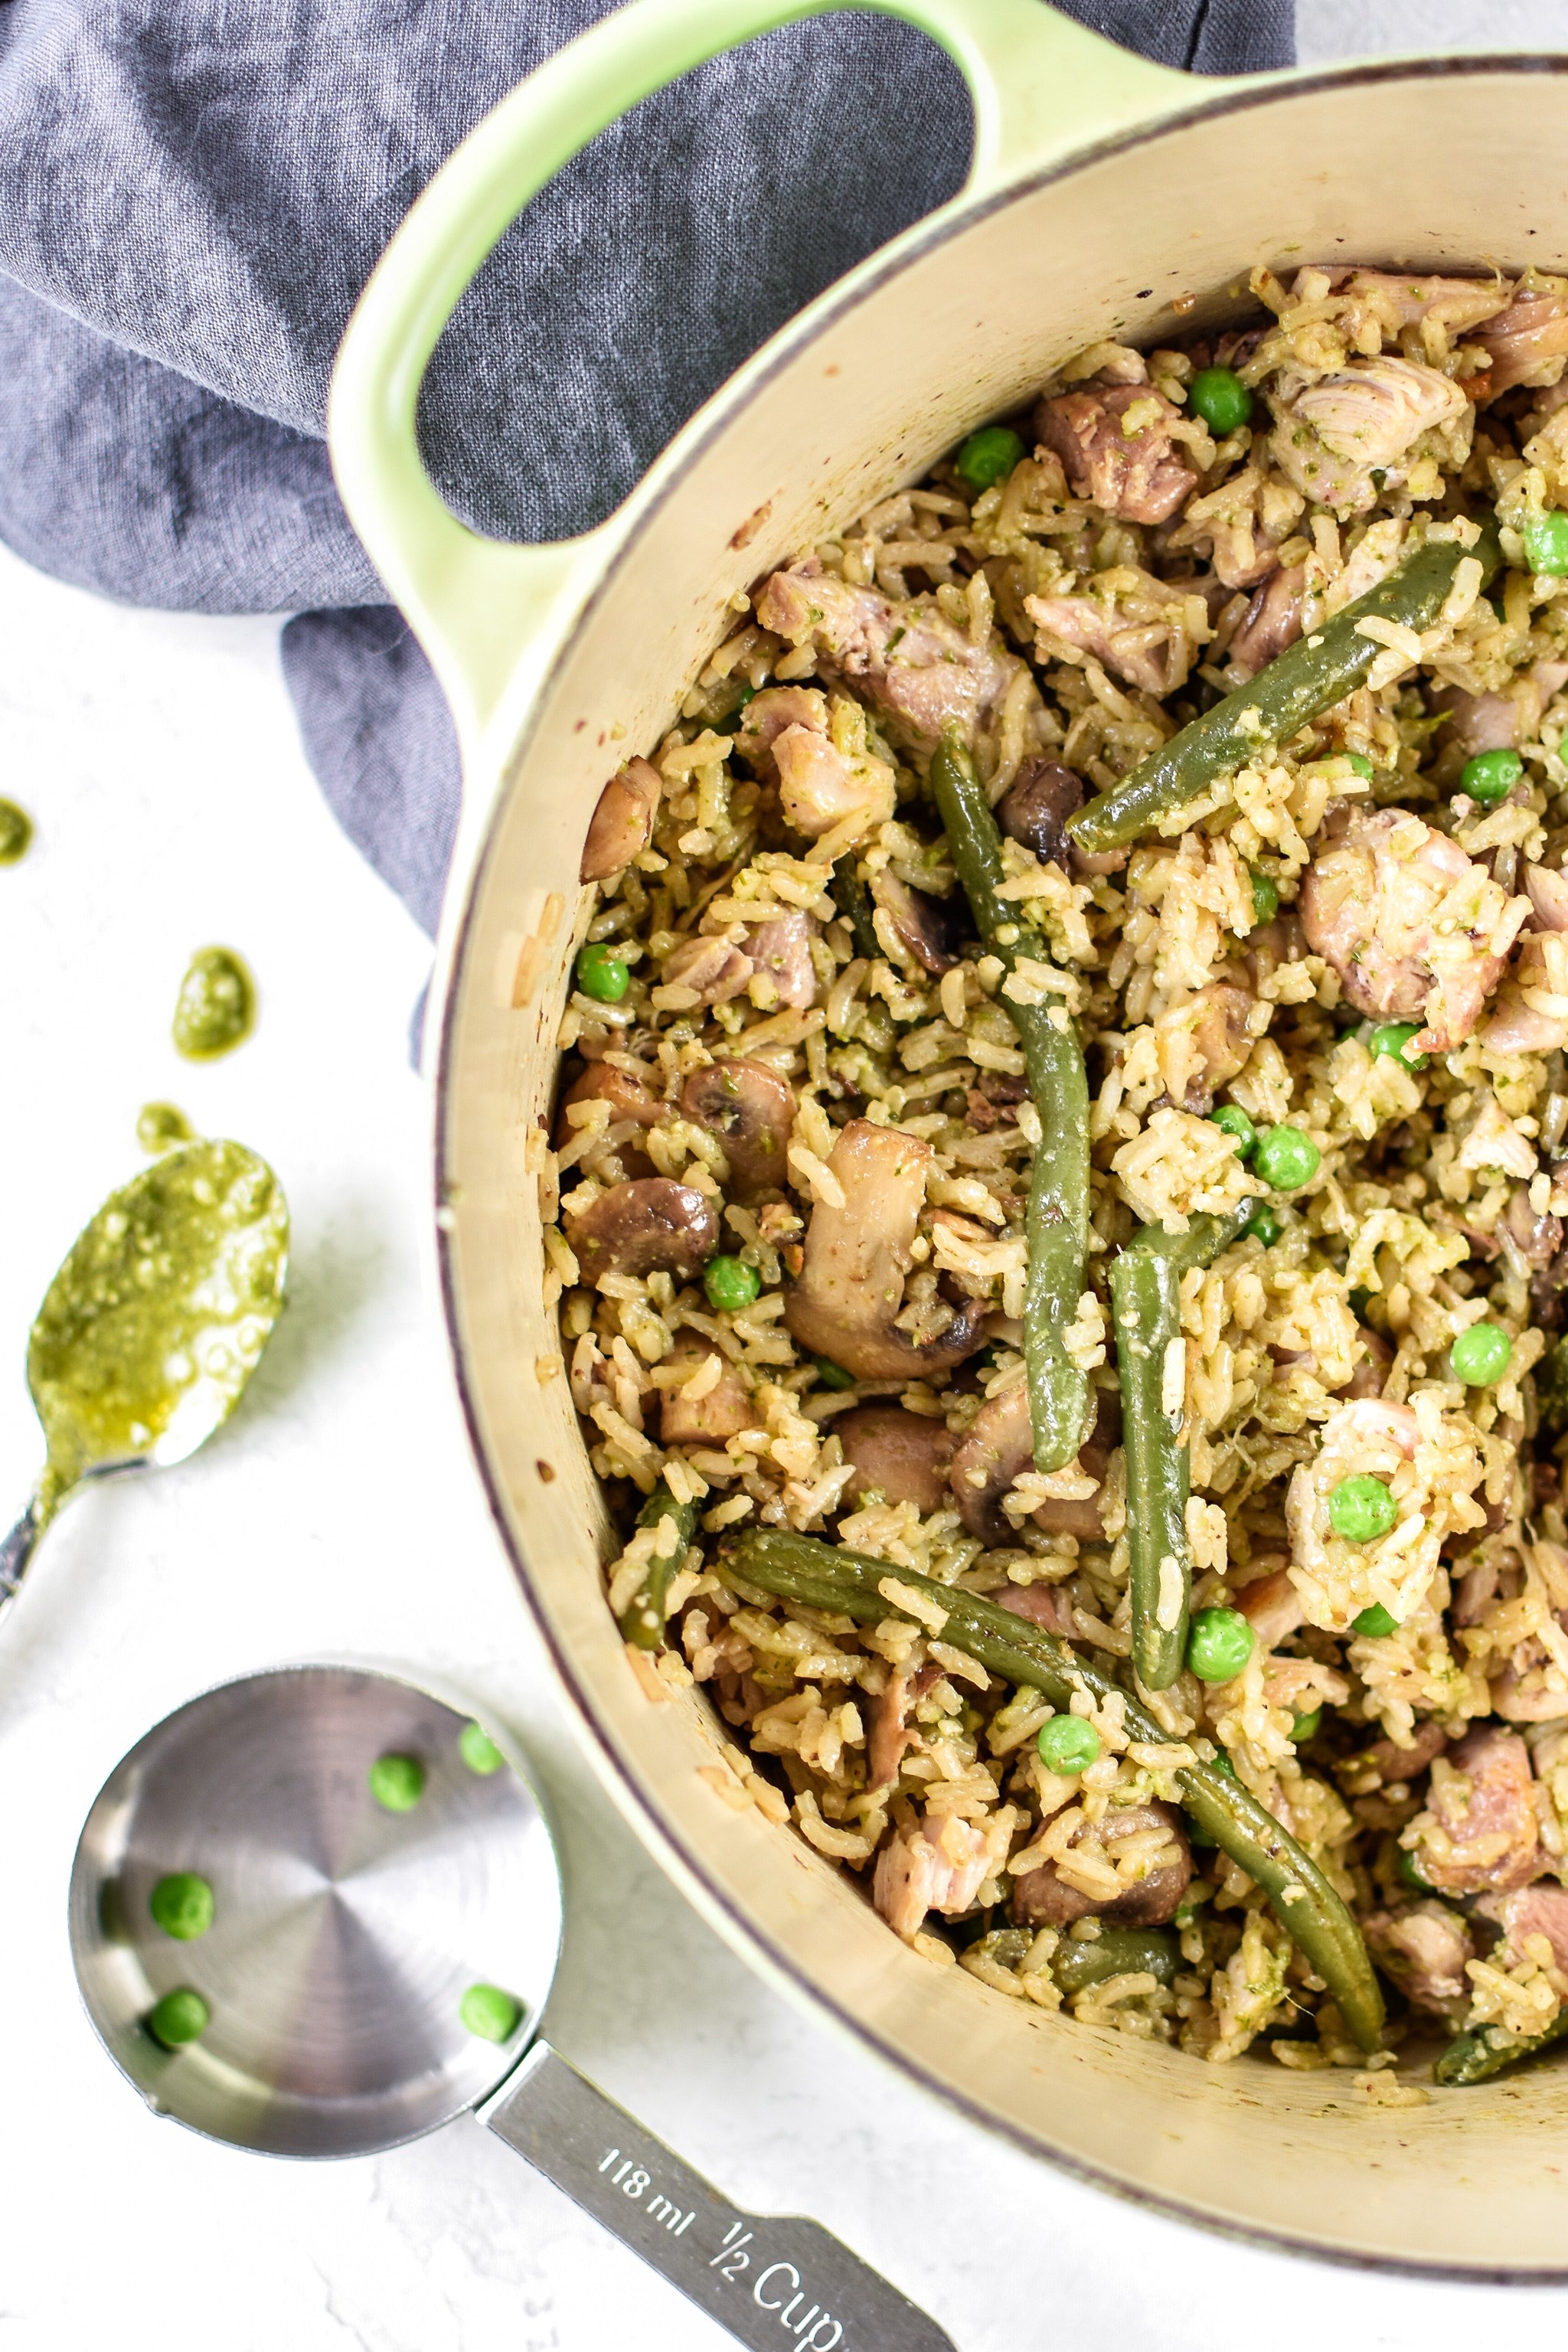 One-pot, no chopping veggies, and done in about 35 minutes. This One-Pot Pesto Chicken and Rice is the perfect idea if you're short on dinner prep time. - ProjectMealPlan.com